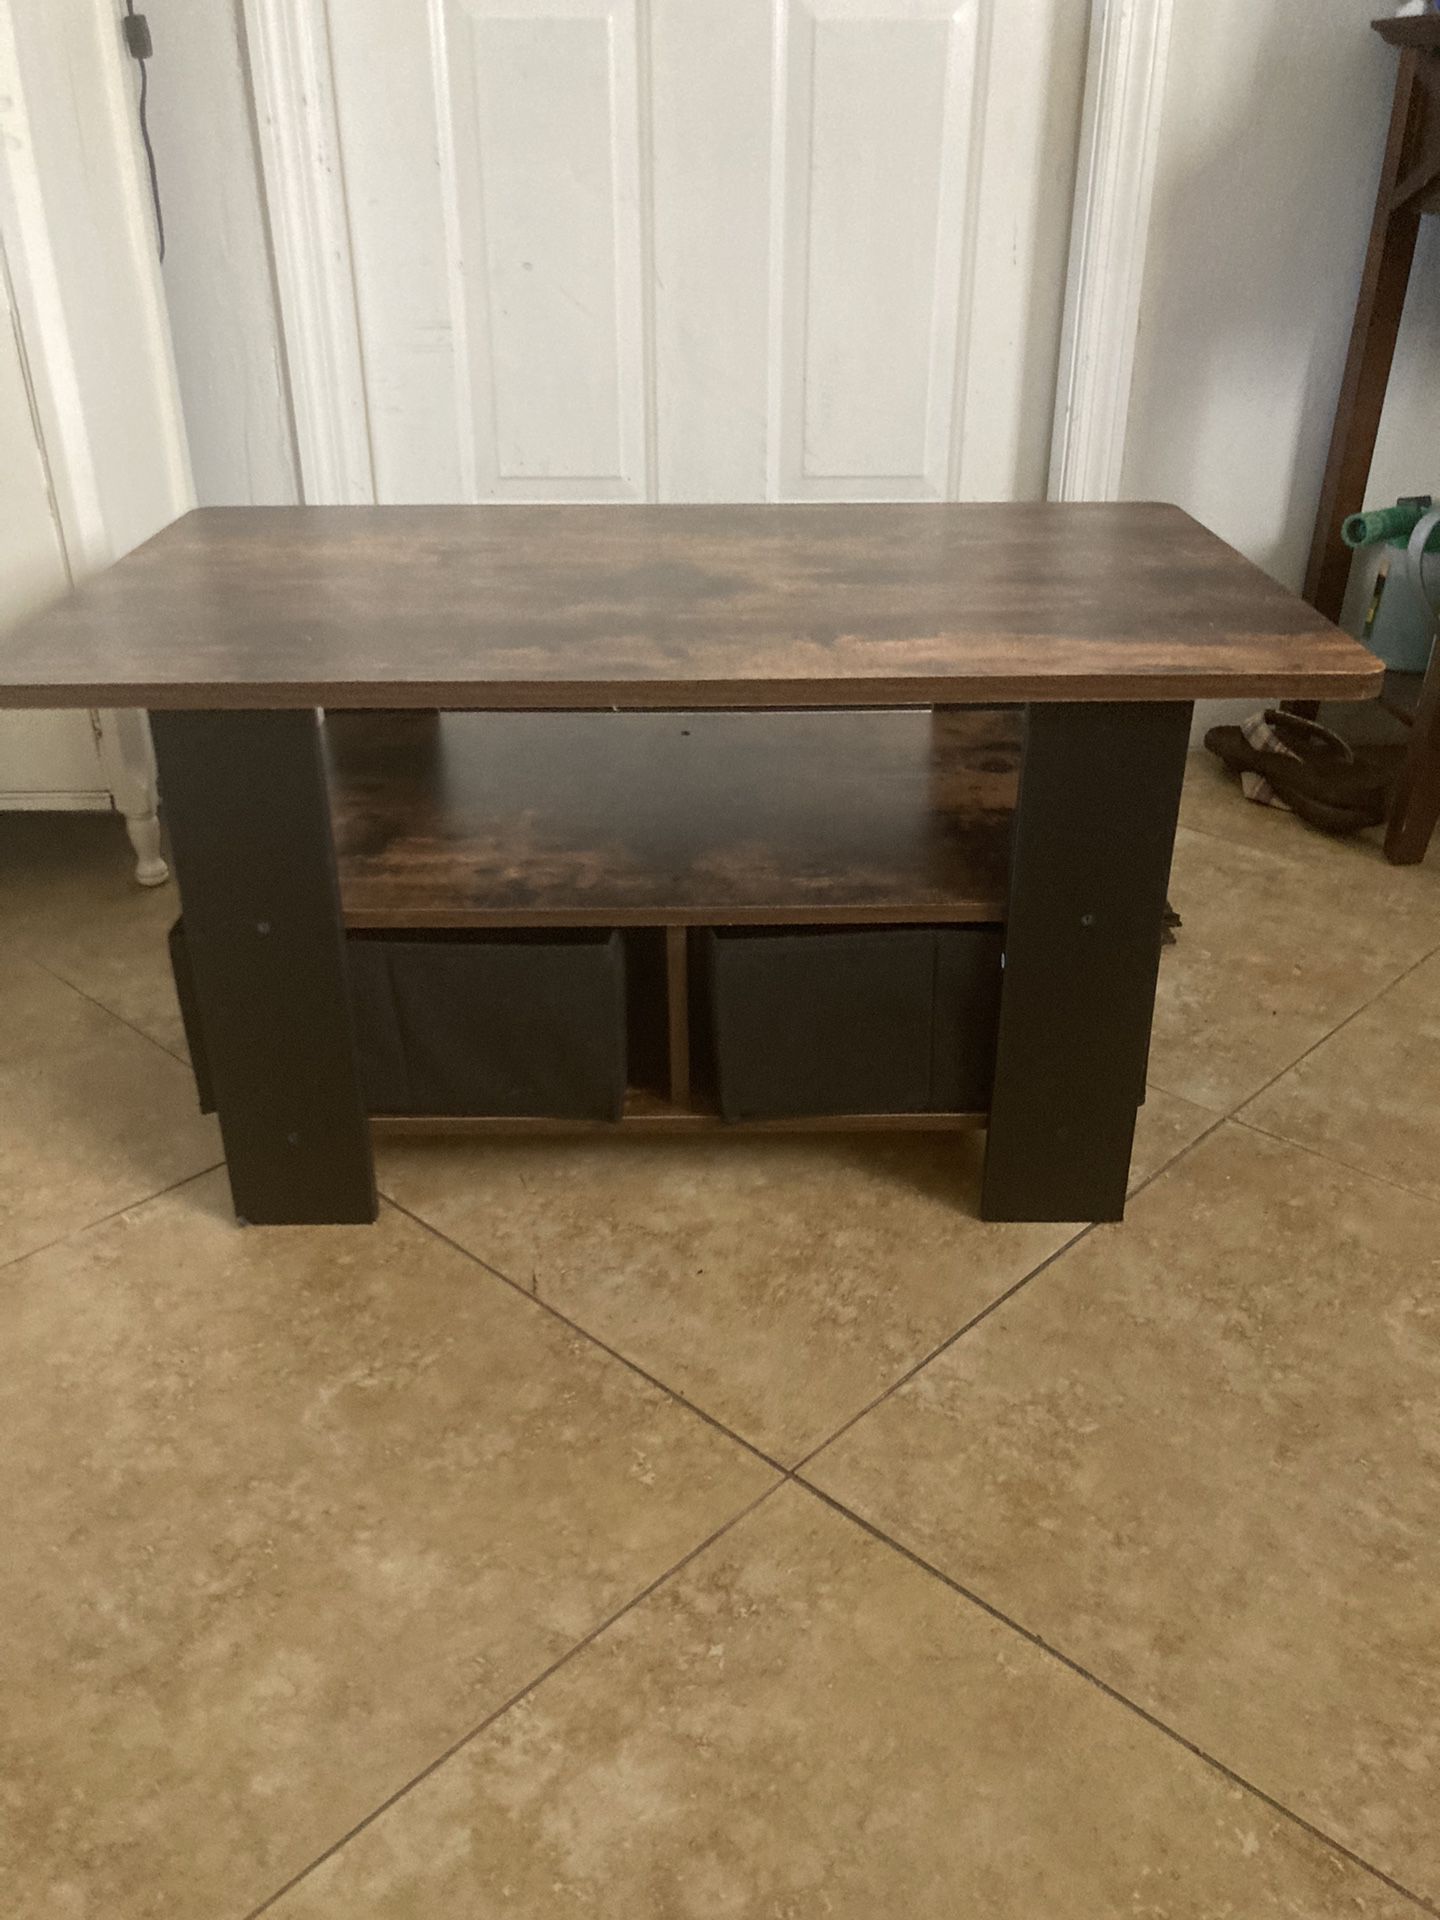 Rustic farmhouse End table With storage